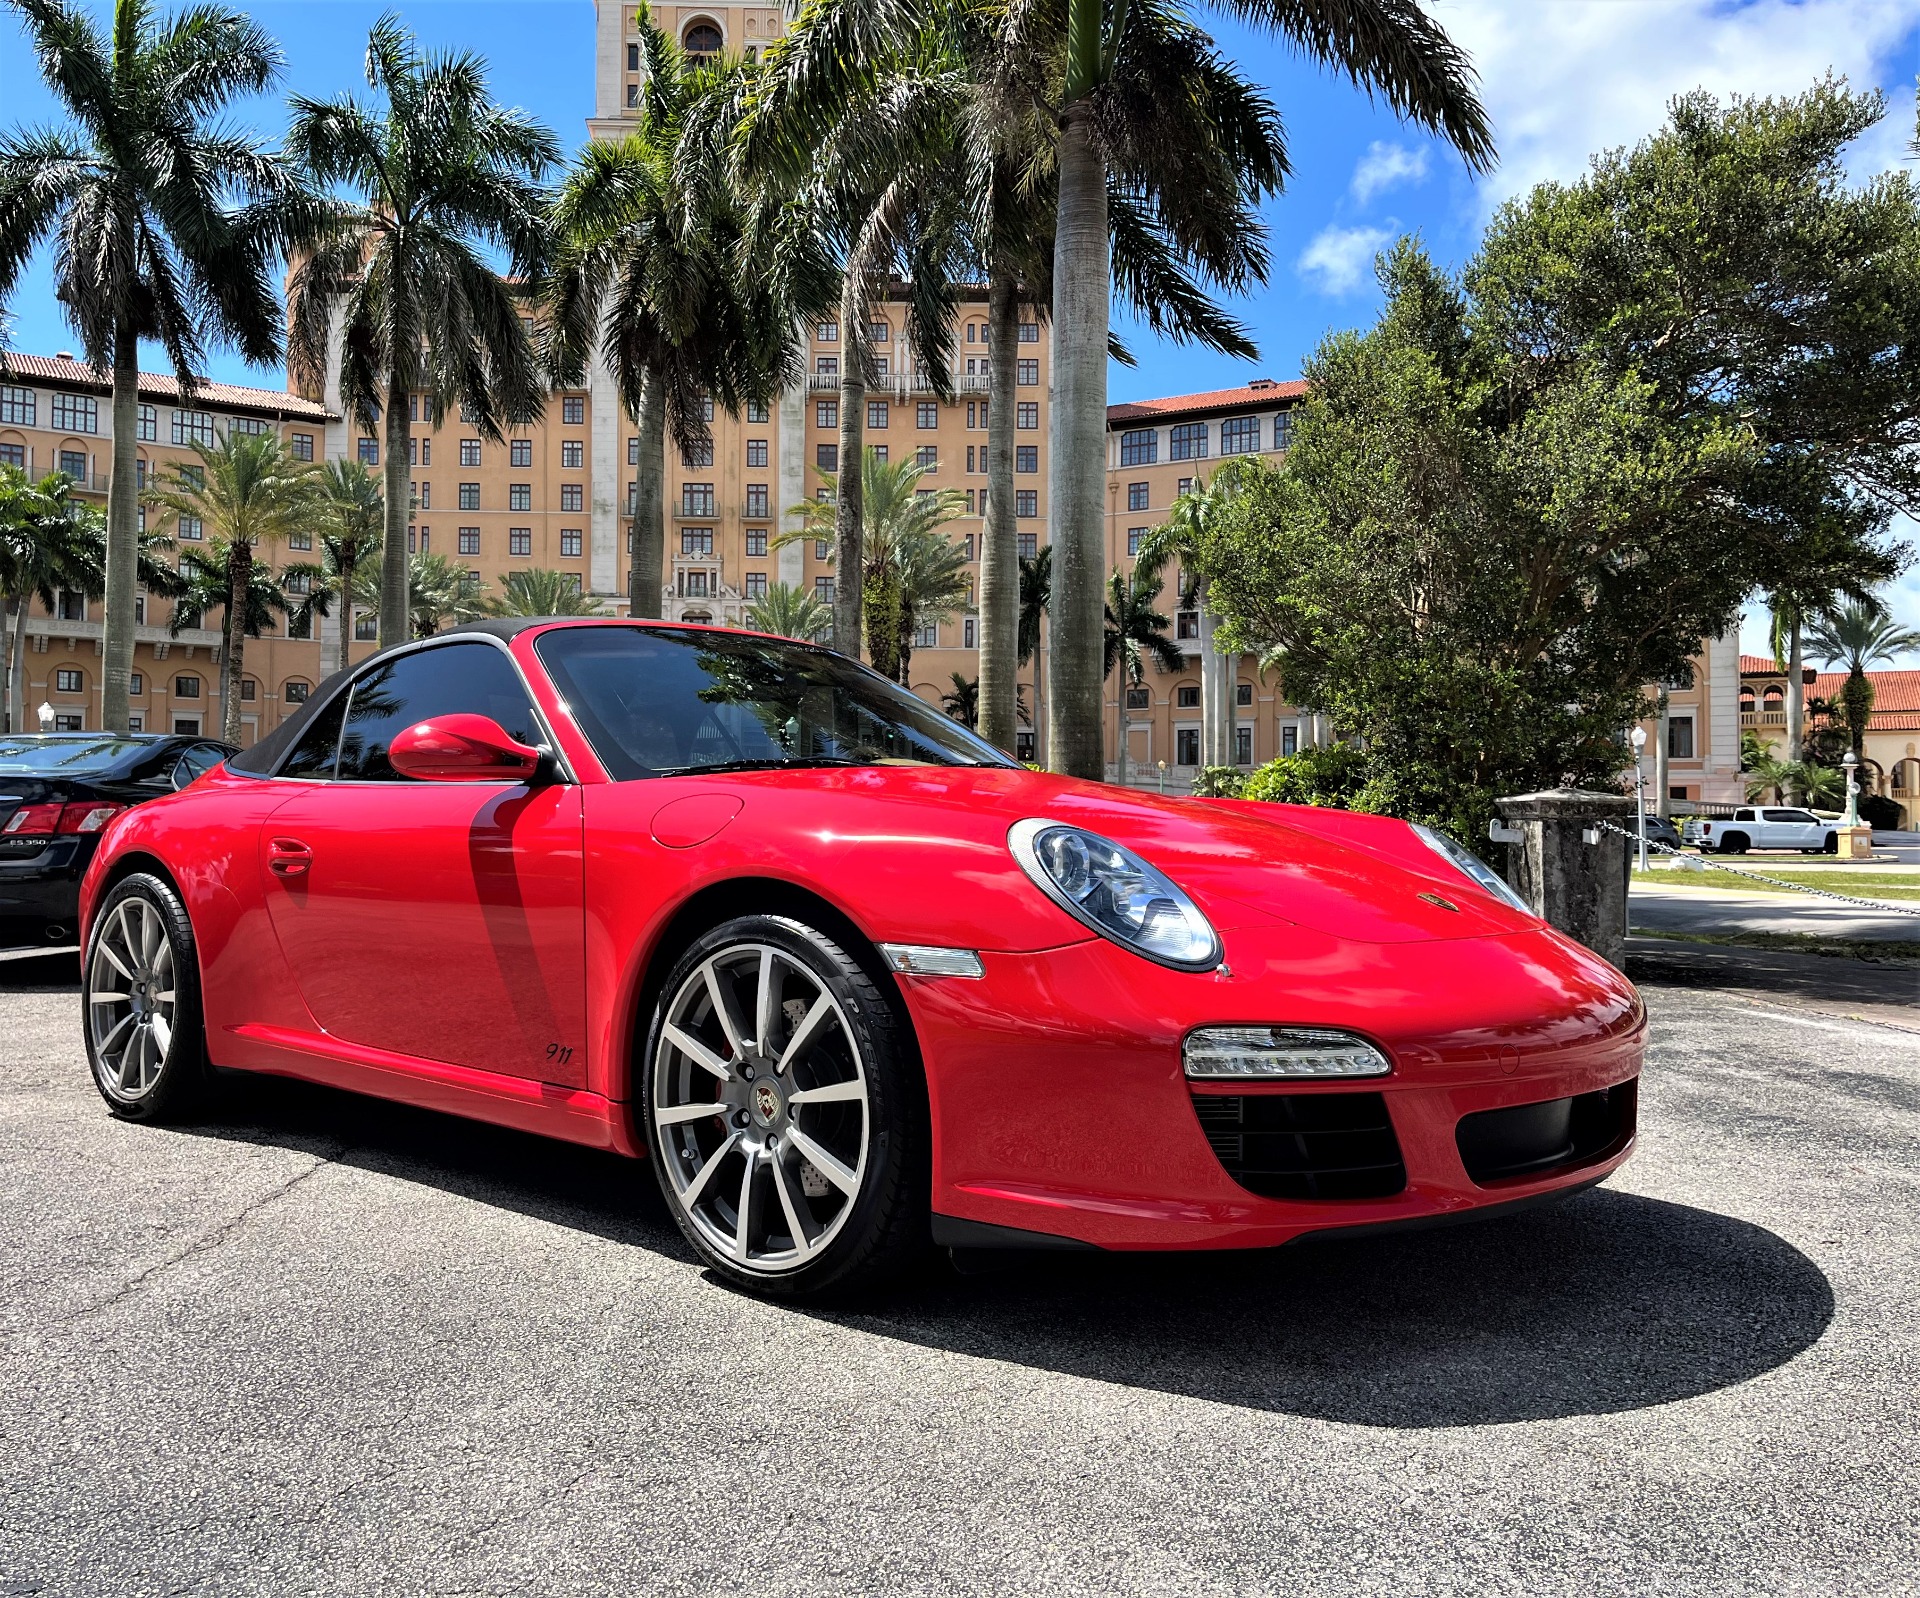 Used 2012 Porsche 911 Carrera for sale Sold at The Gables Sports Cars in Miami FL 33146 2